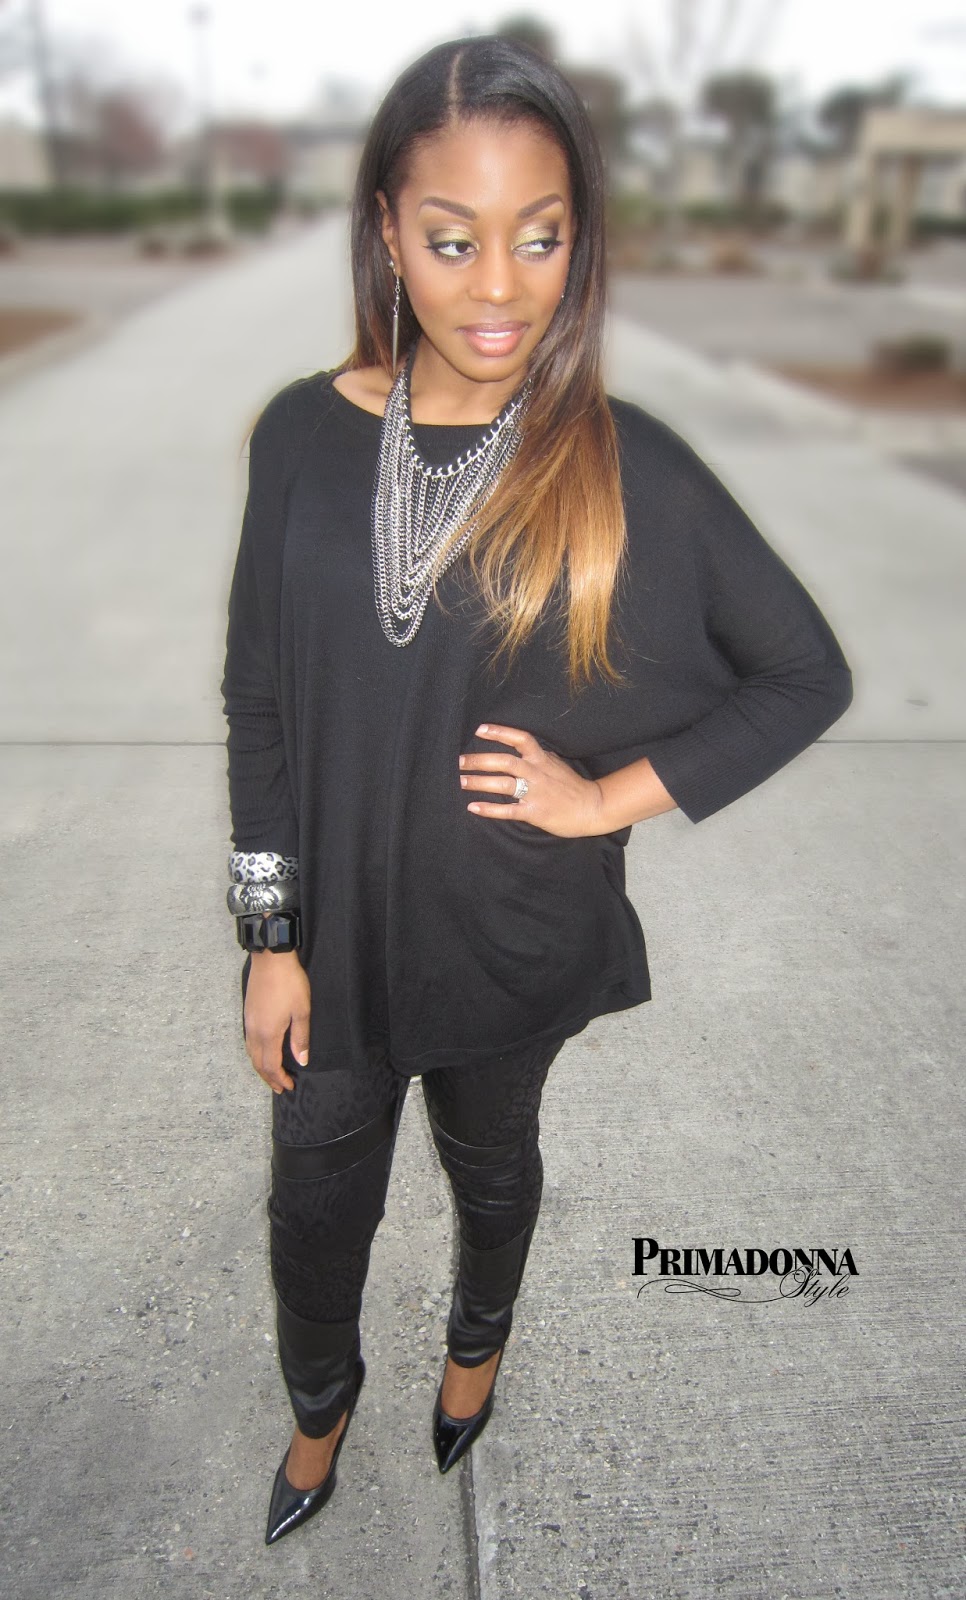 Primadonna Style: All Black Everything